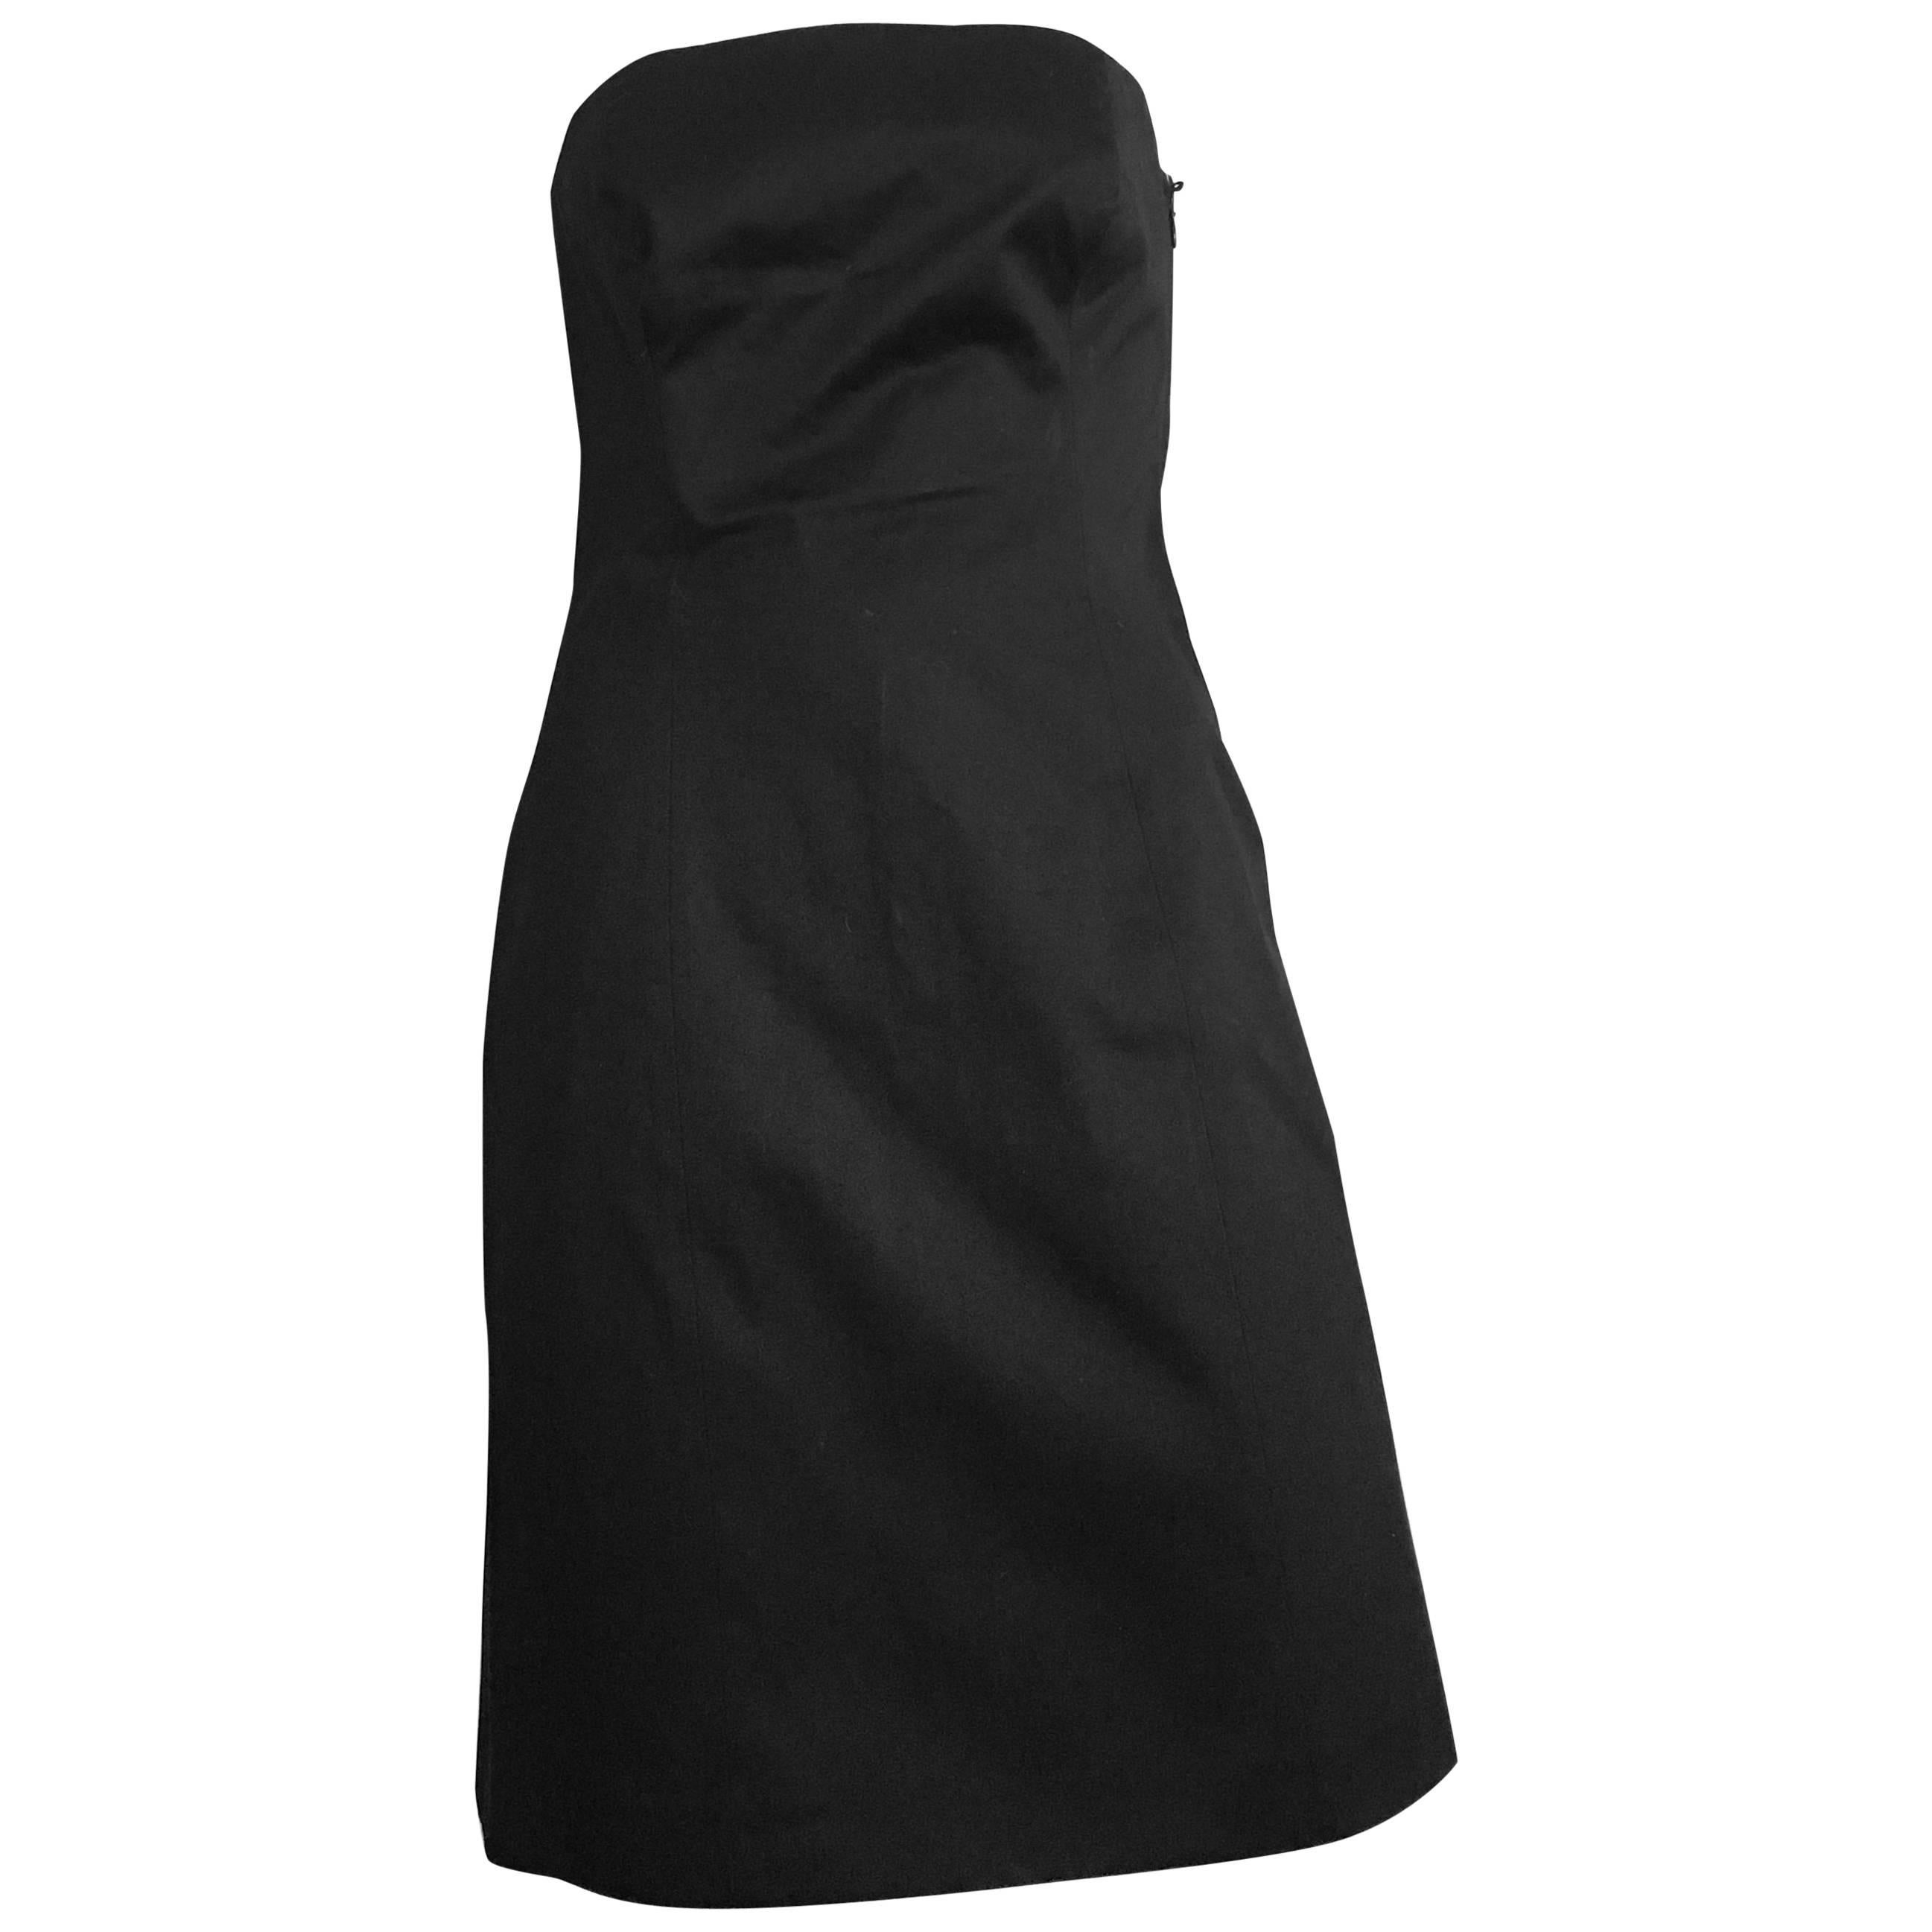 Michael Kors Strapless Cotton Black Cocktail Dress Size 4 / 6. Made in Italy. For Sale